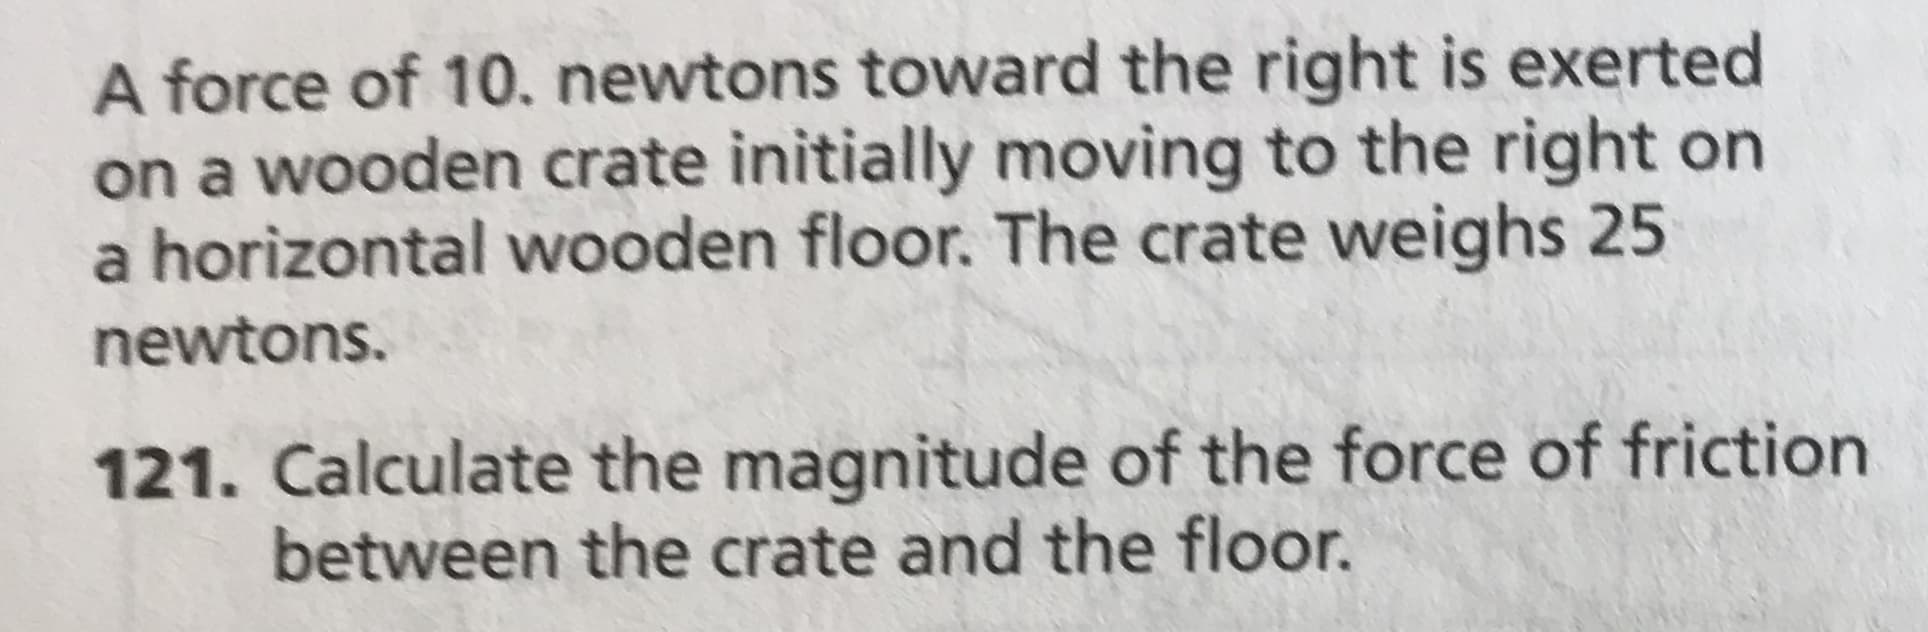 A force of 10. newtons toward the right is exerted
on a wooden crate initially moving to the right on
a horizontal wooden floor. The crate weighs 25
newtons.
121. Calculate the magnitude of the force of friction
between the crate and the floor.
